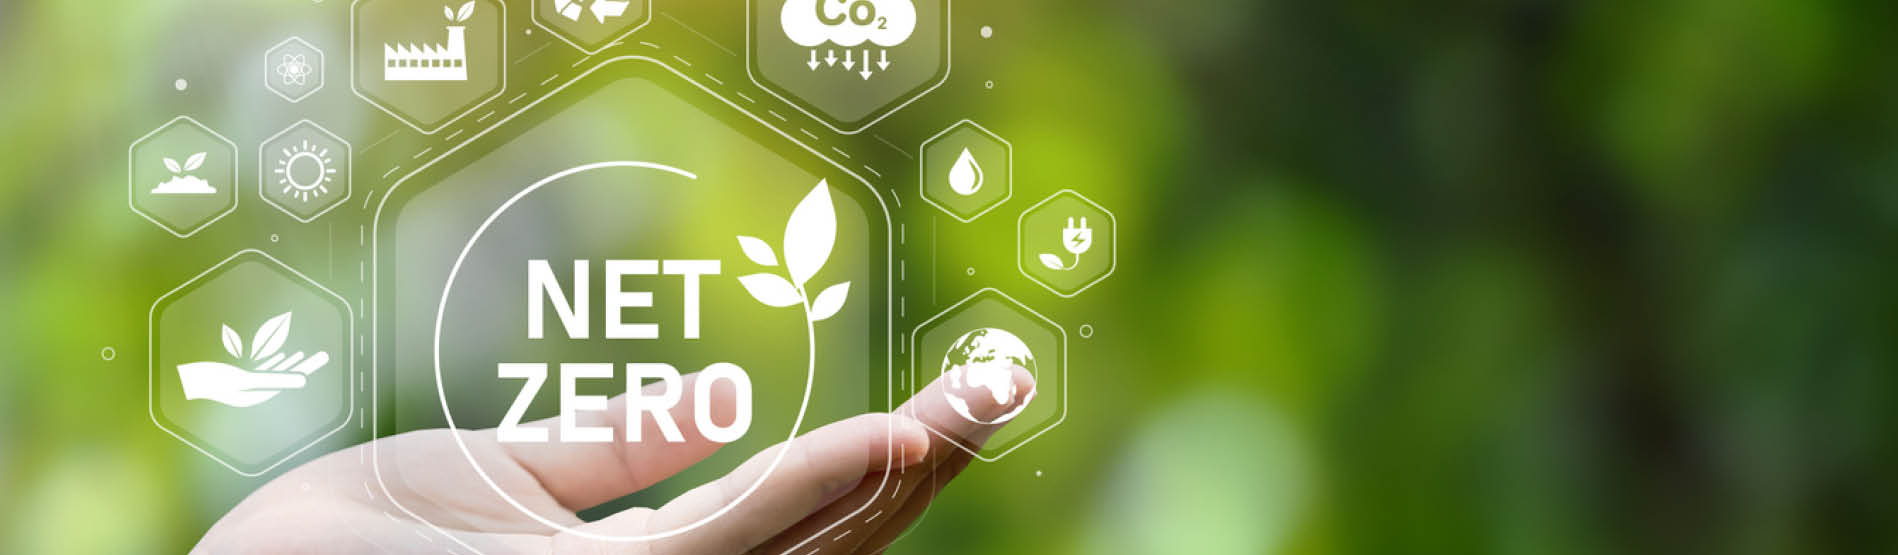 NET ZERO words and some eco icons floating above the hand on a green background